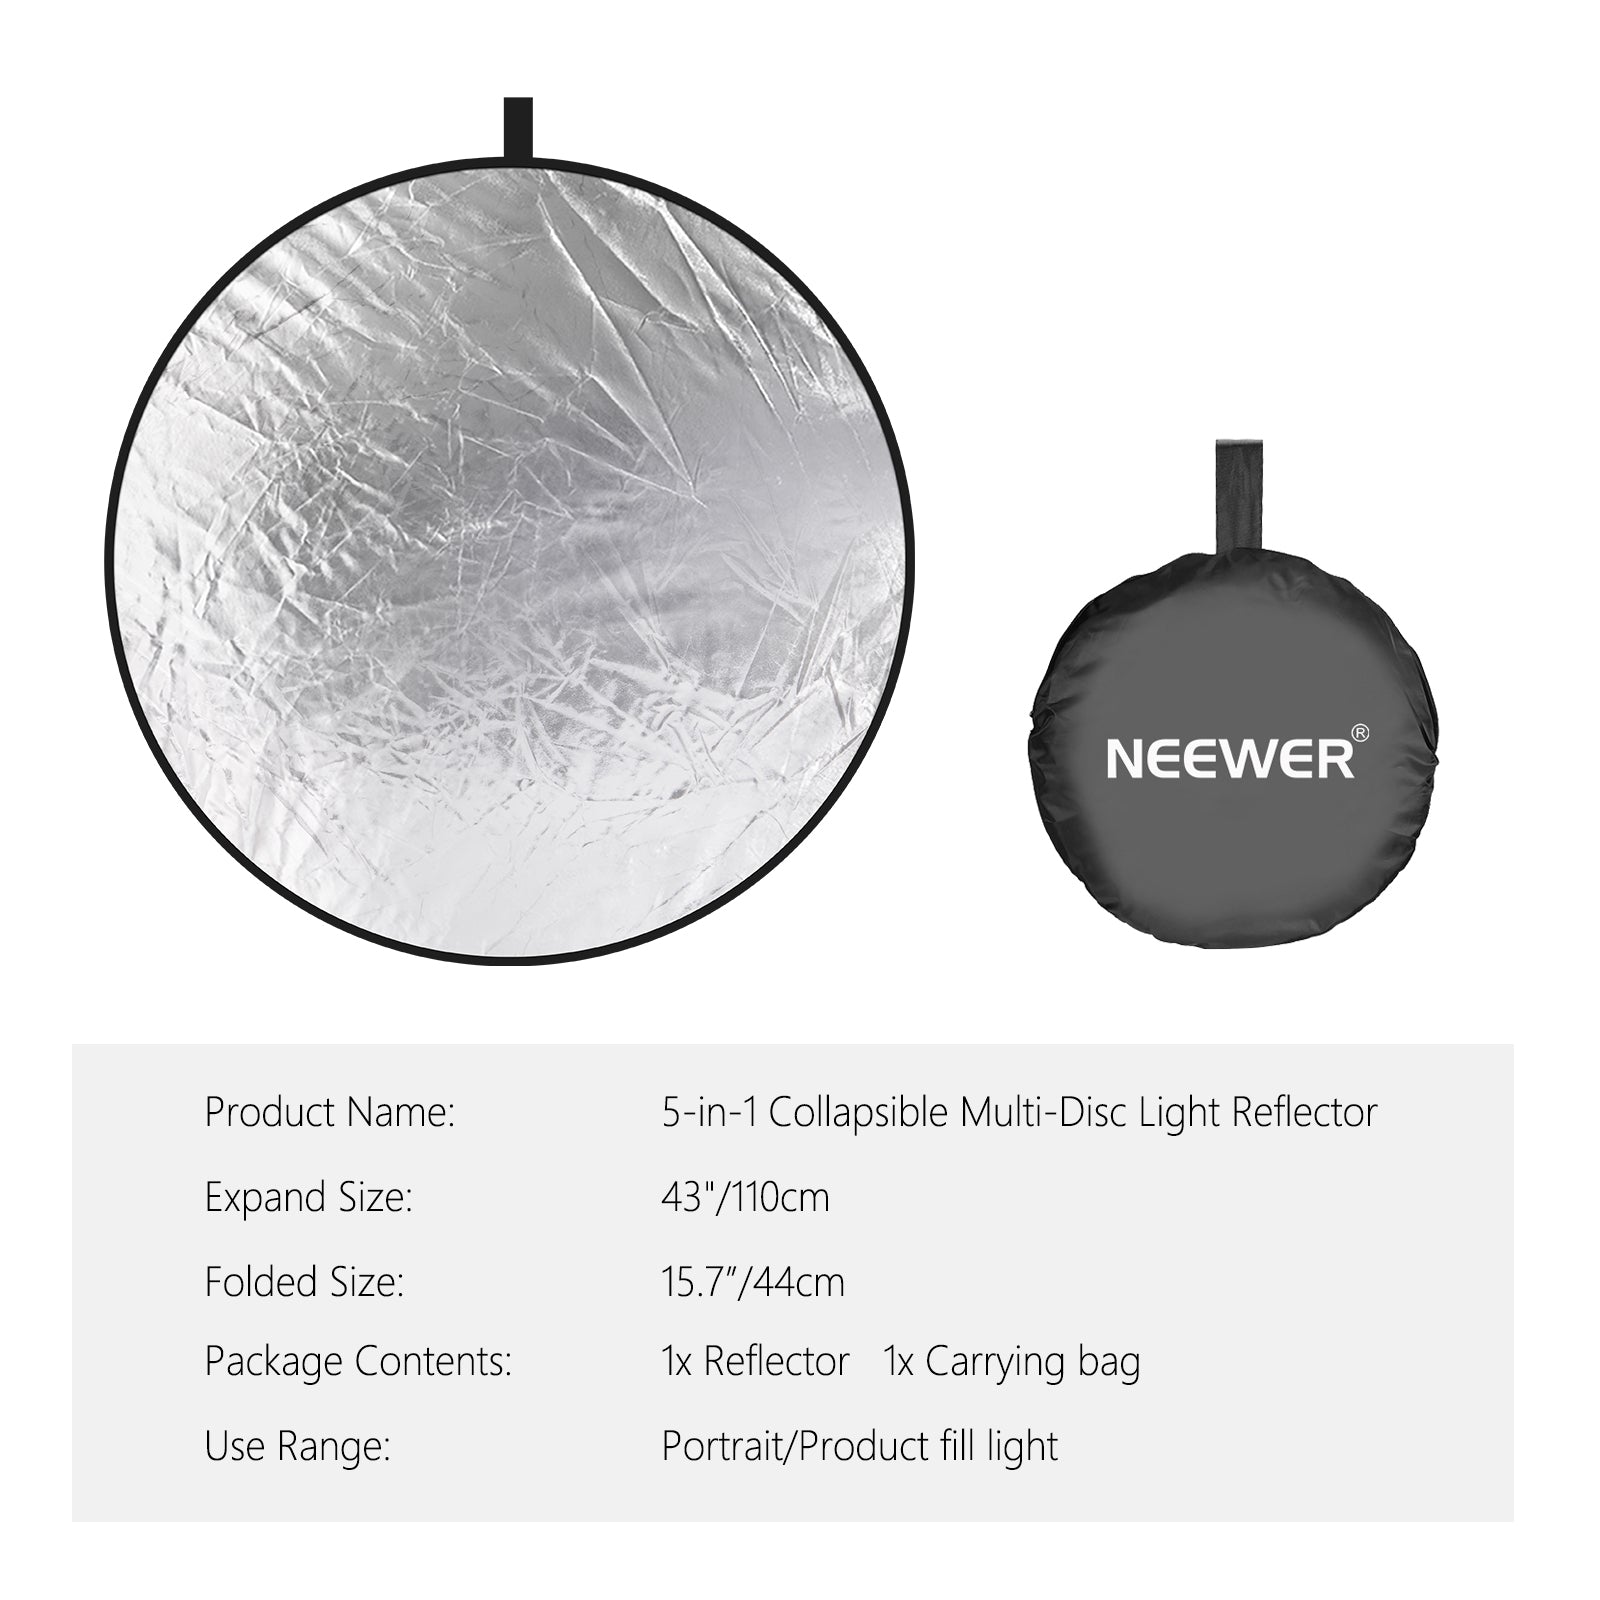 Neewer Light Reflector 5-in-1 Collapsible Multi-Disc with Bag